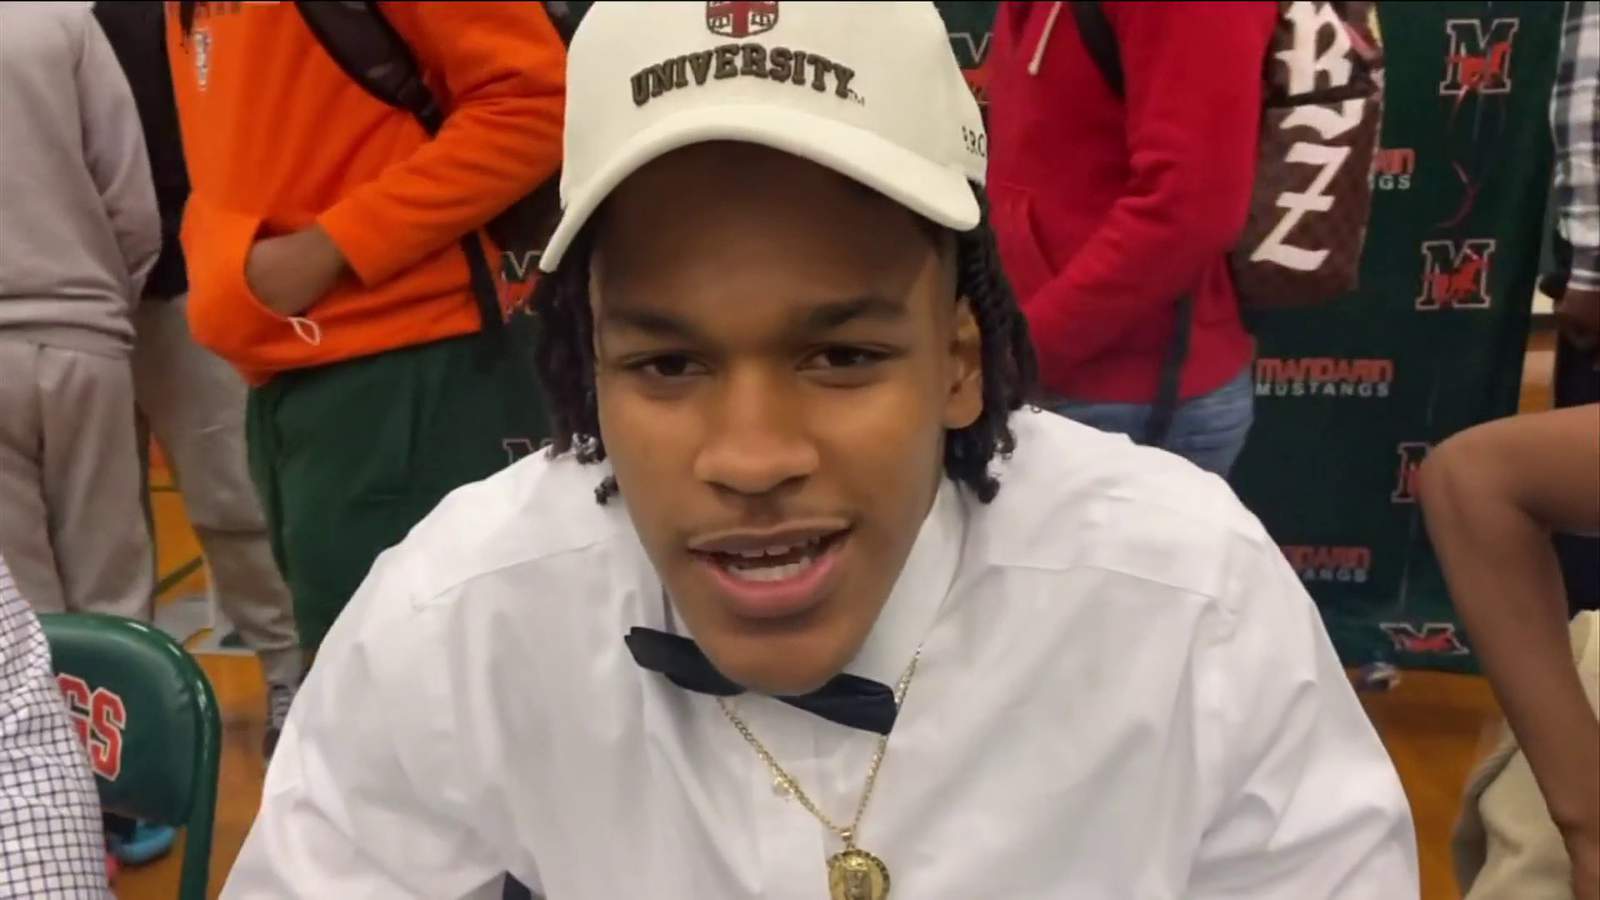 National signing day 2021: A look at Wednesday’s area football signings